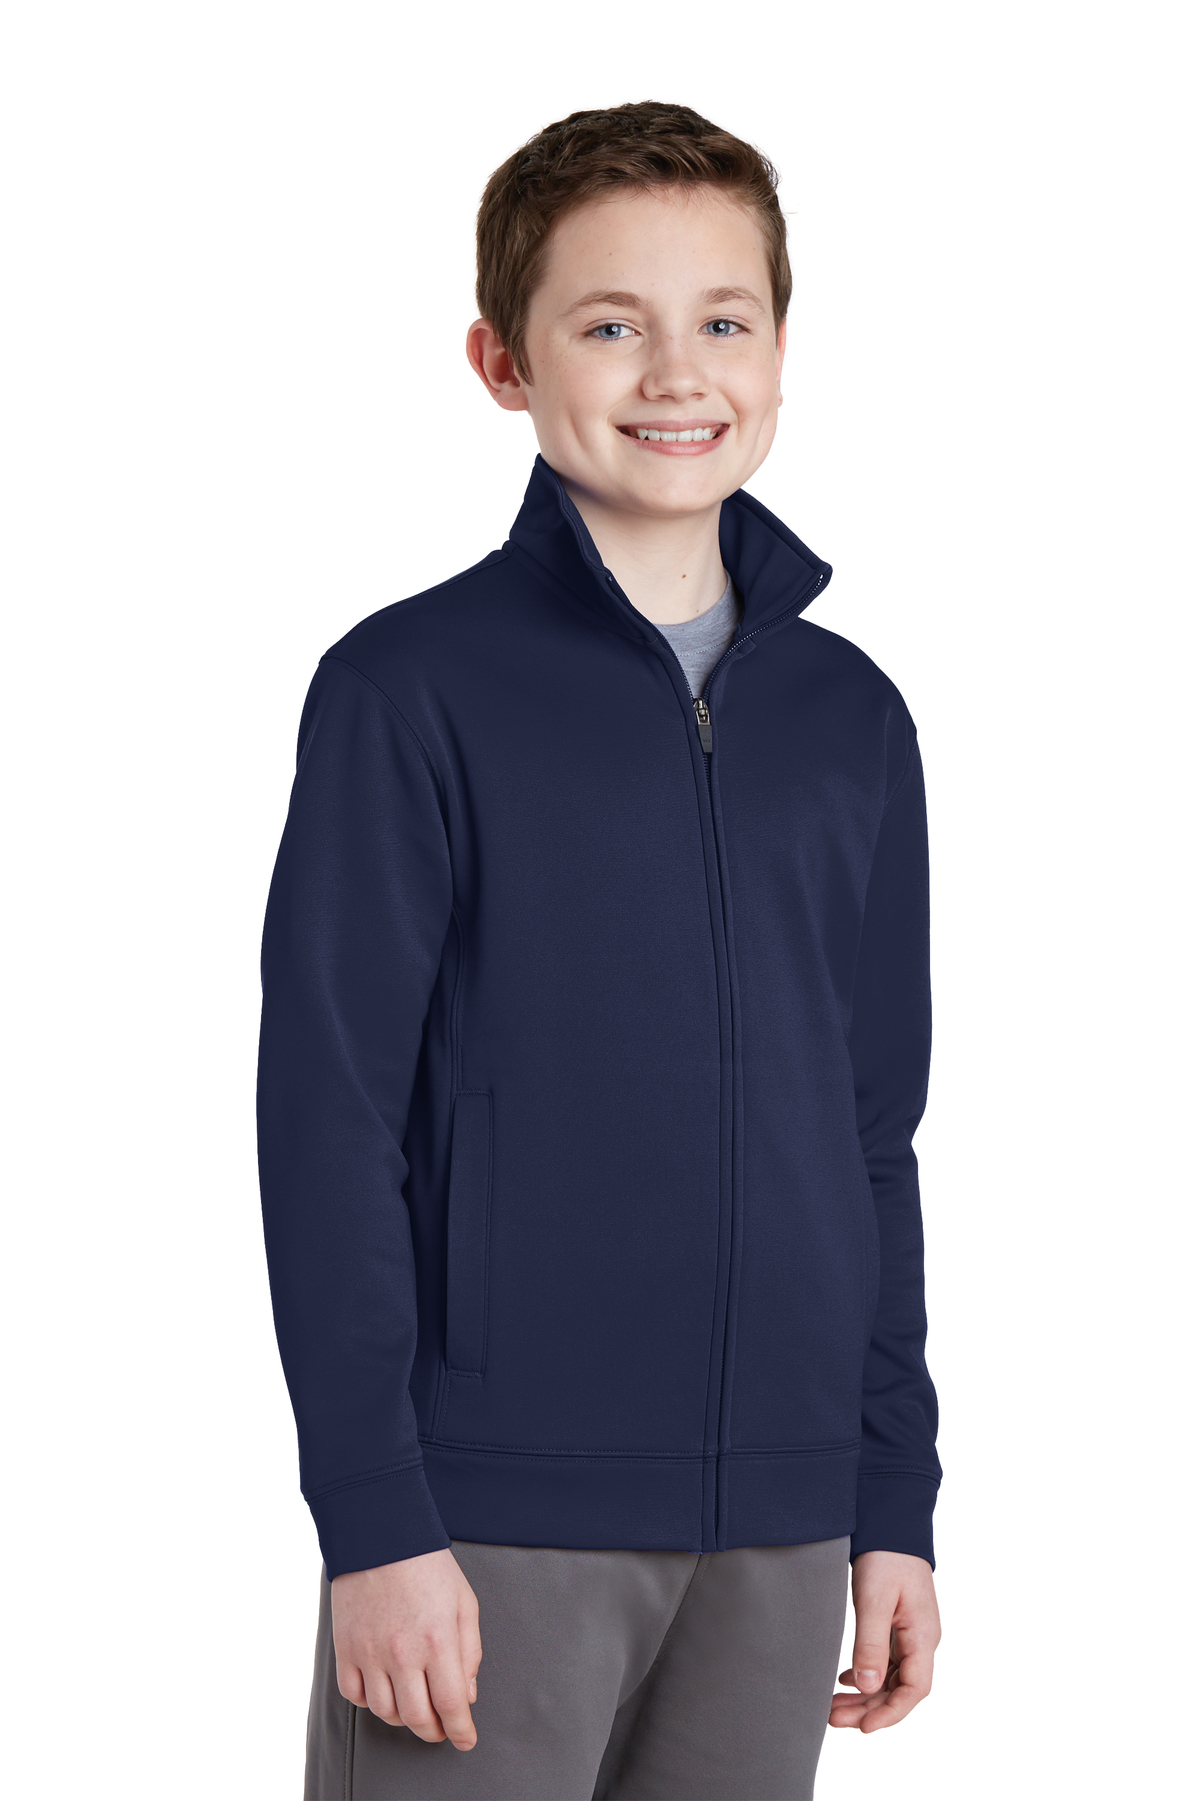 Youth Nantucket Fleece Full Zip Jacket with Right Chest Pocket